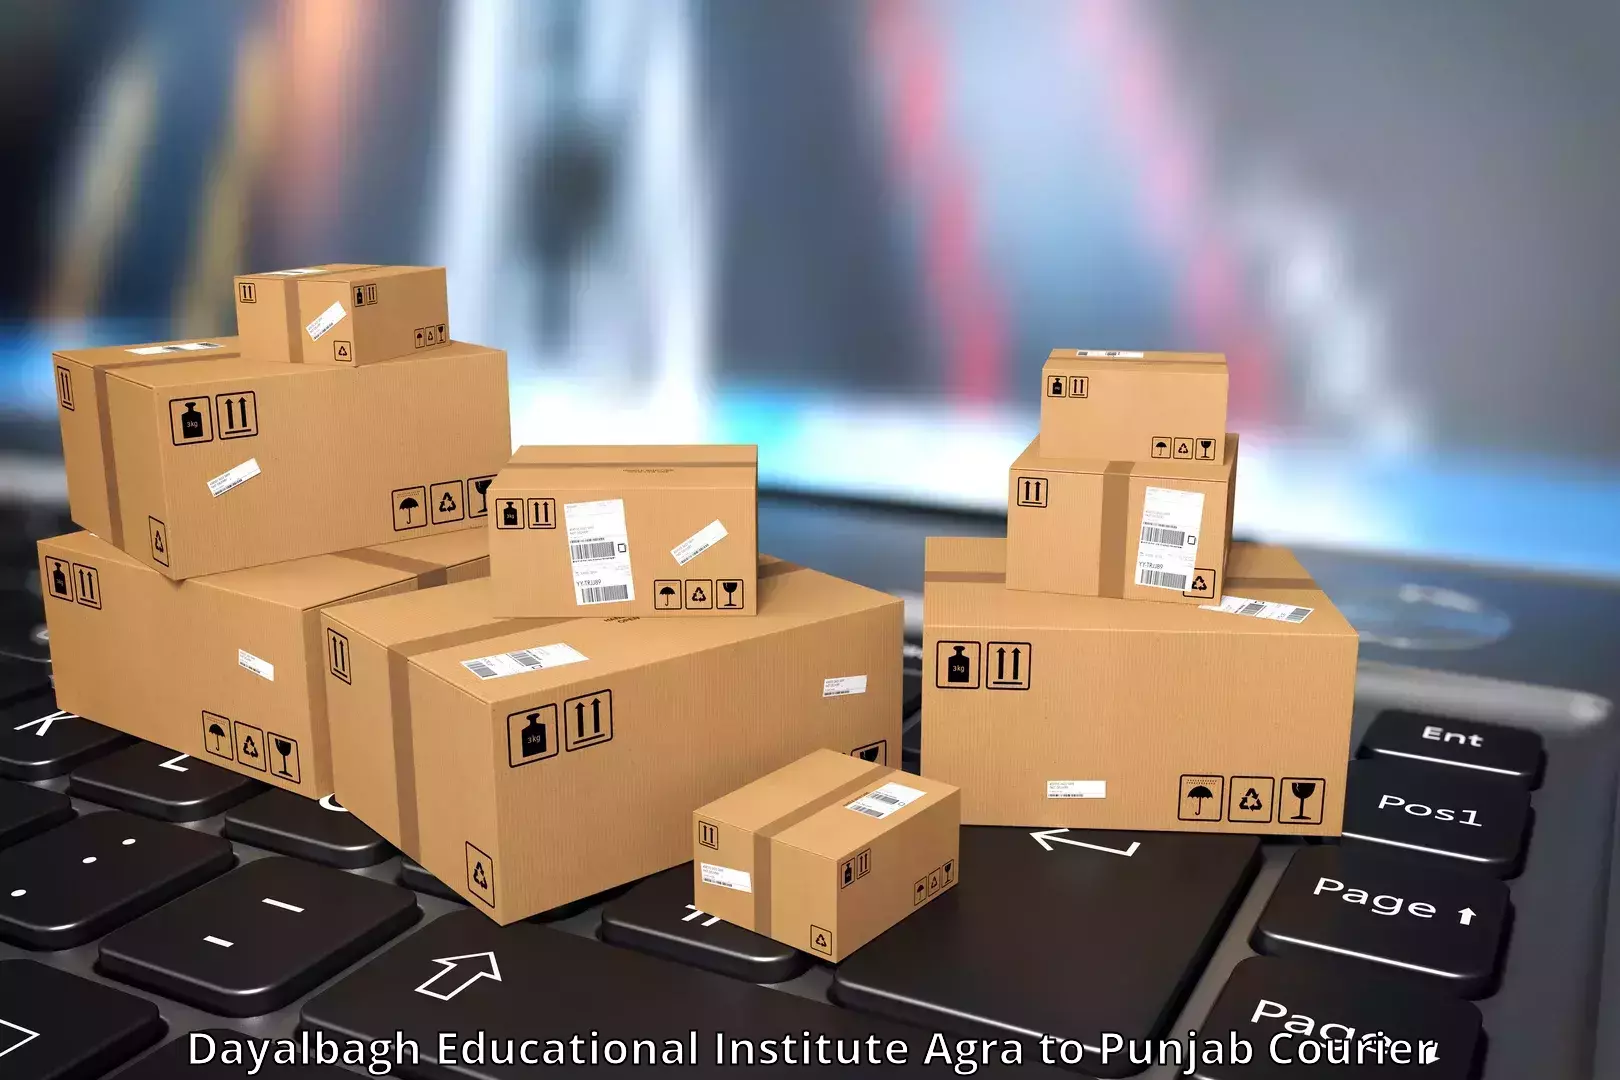 Efficient cargo services Dayalbagh Educational Institute Agra to Batala